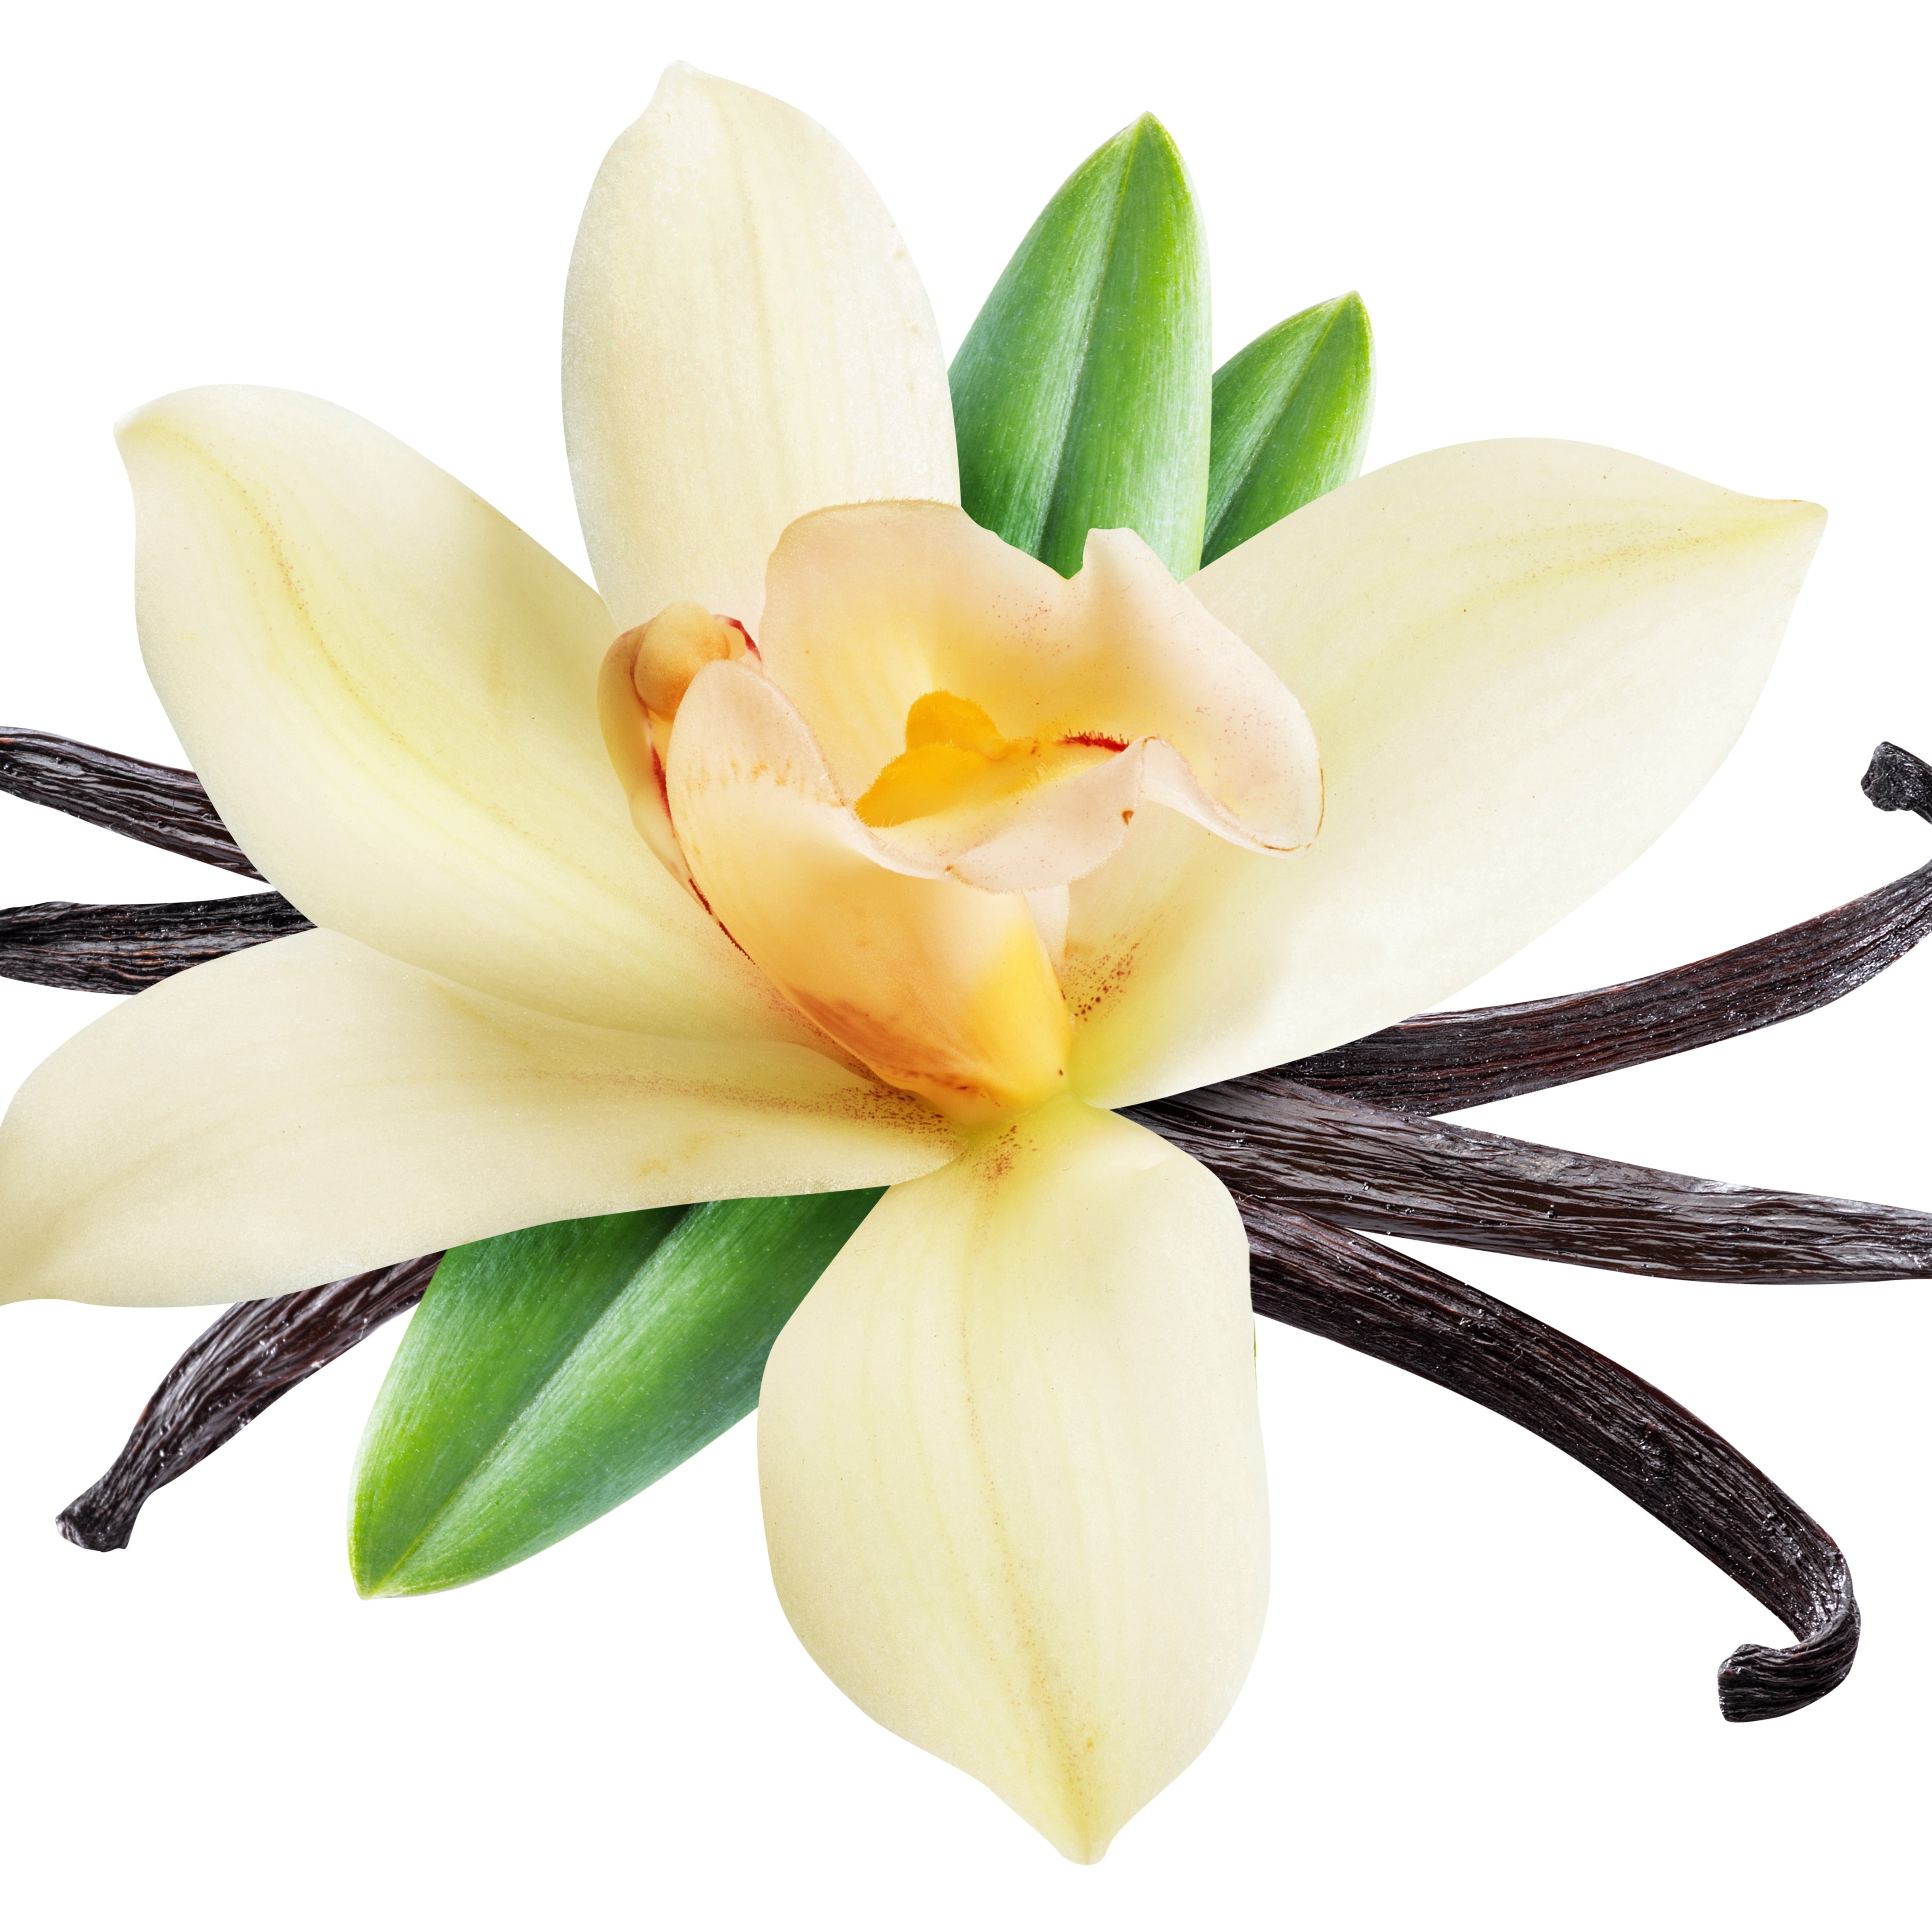 Tuscany Candle® Spiced Ground Vanilla Scented Wax Melt (2.5 oz) with vanilla flower and vanilla pods on a white background.